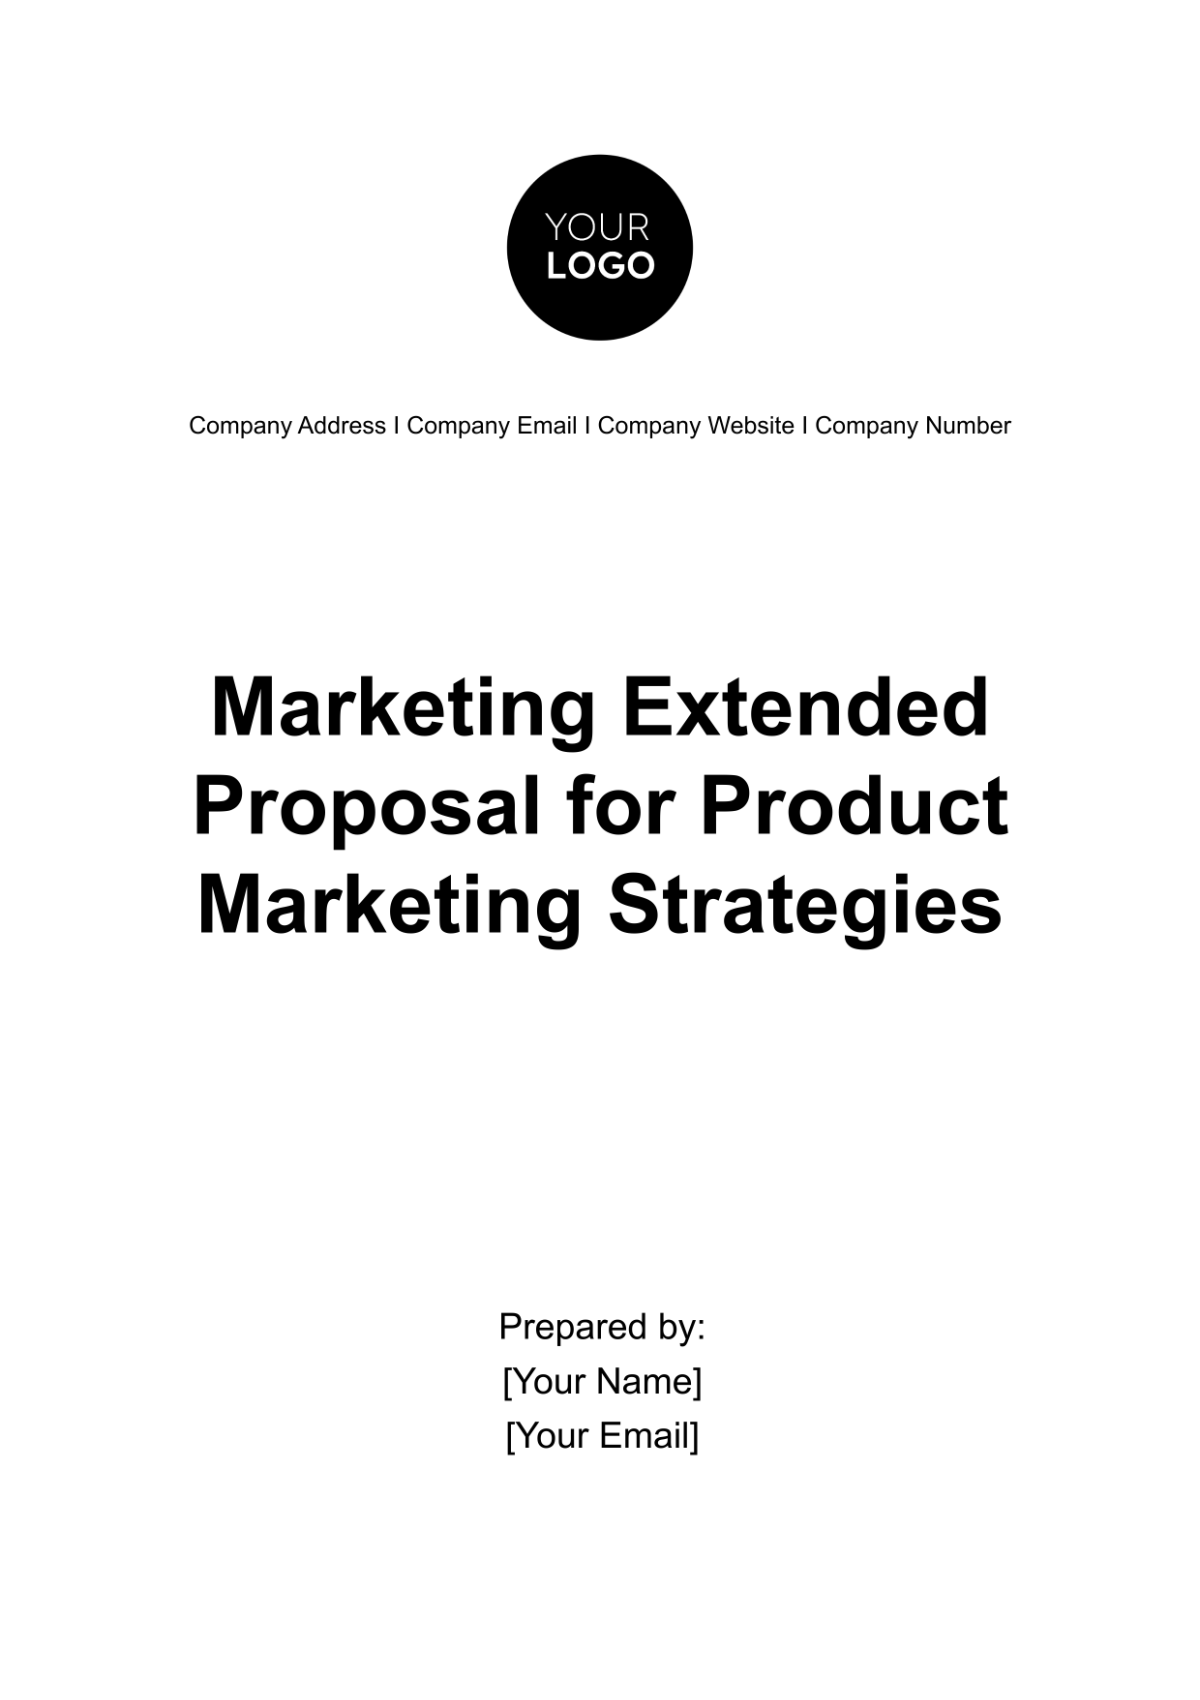 Marketing Extended Proposal for Product Marketing Strategies Template